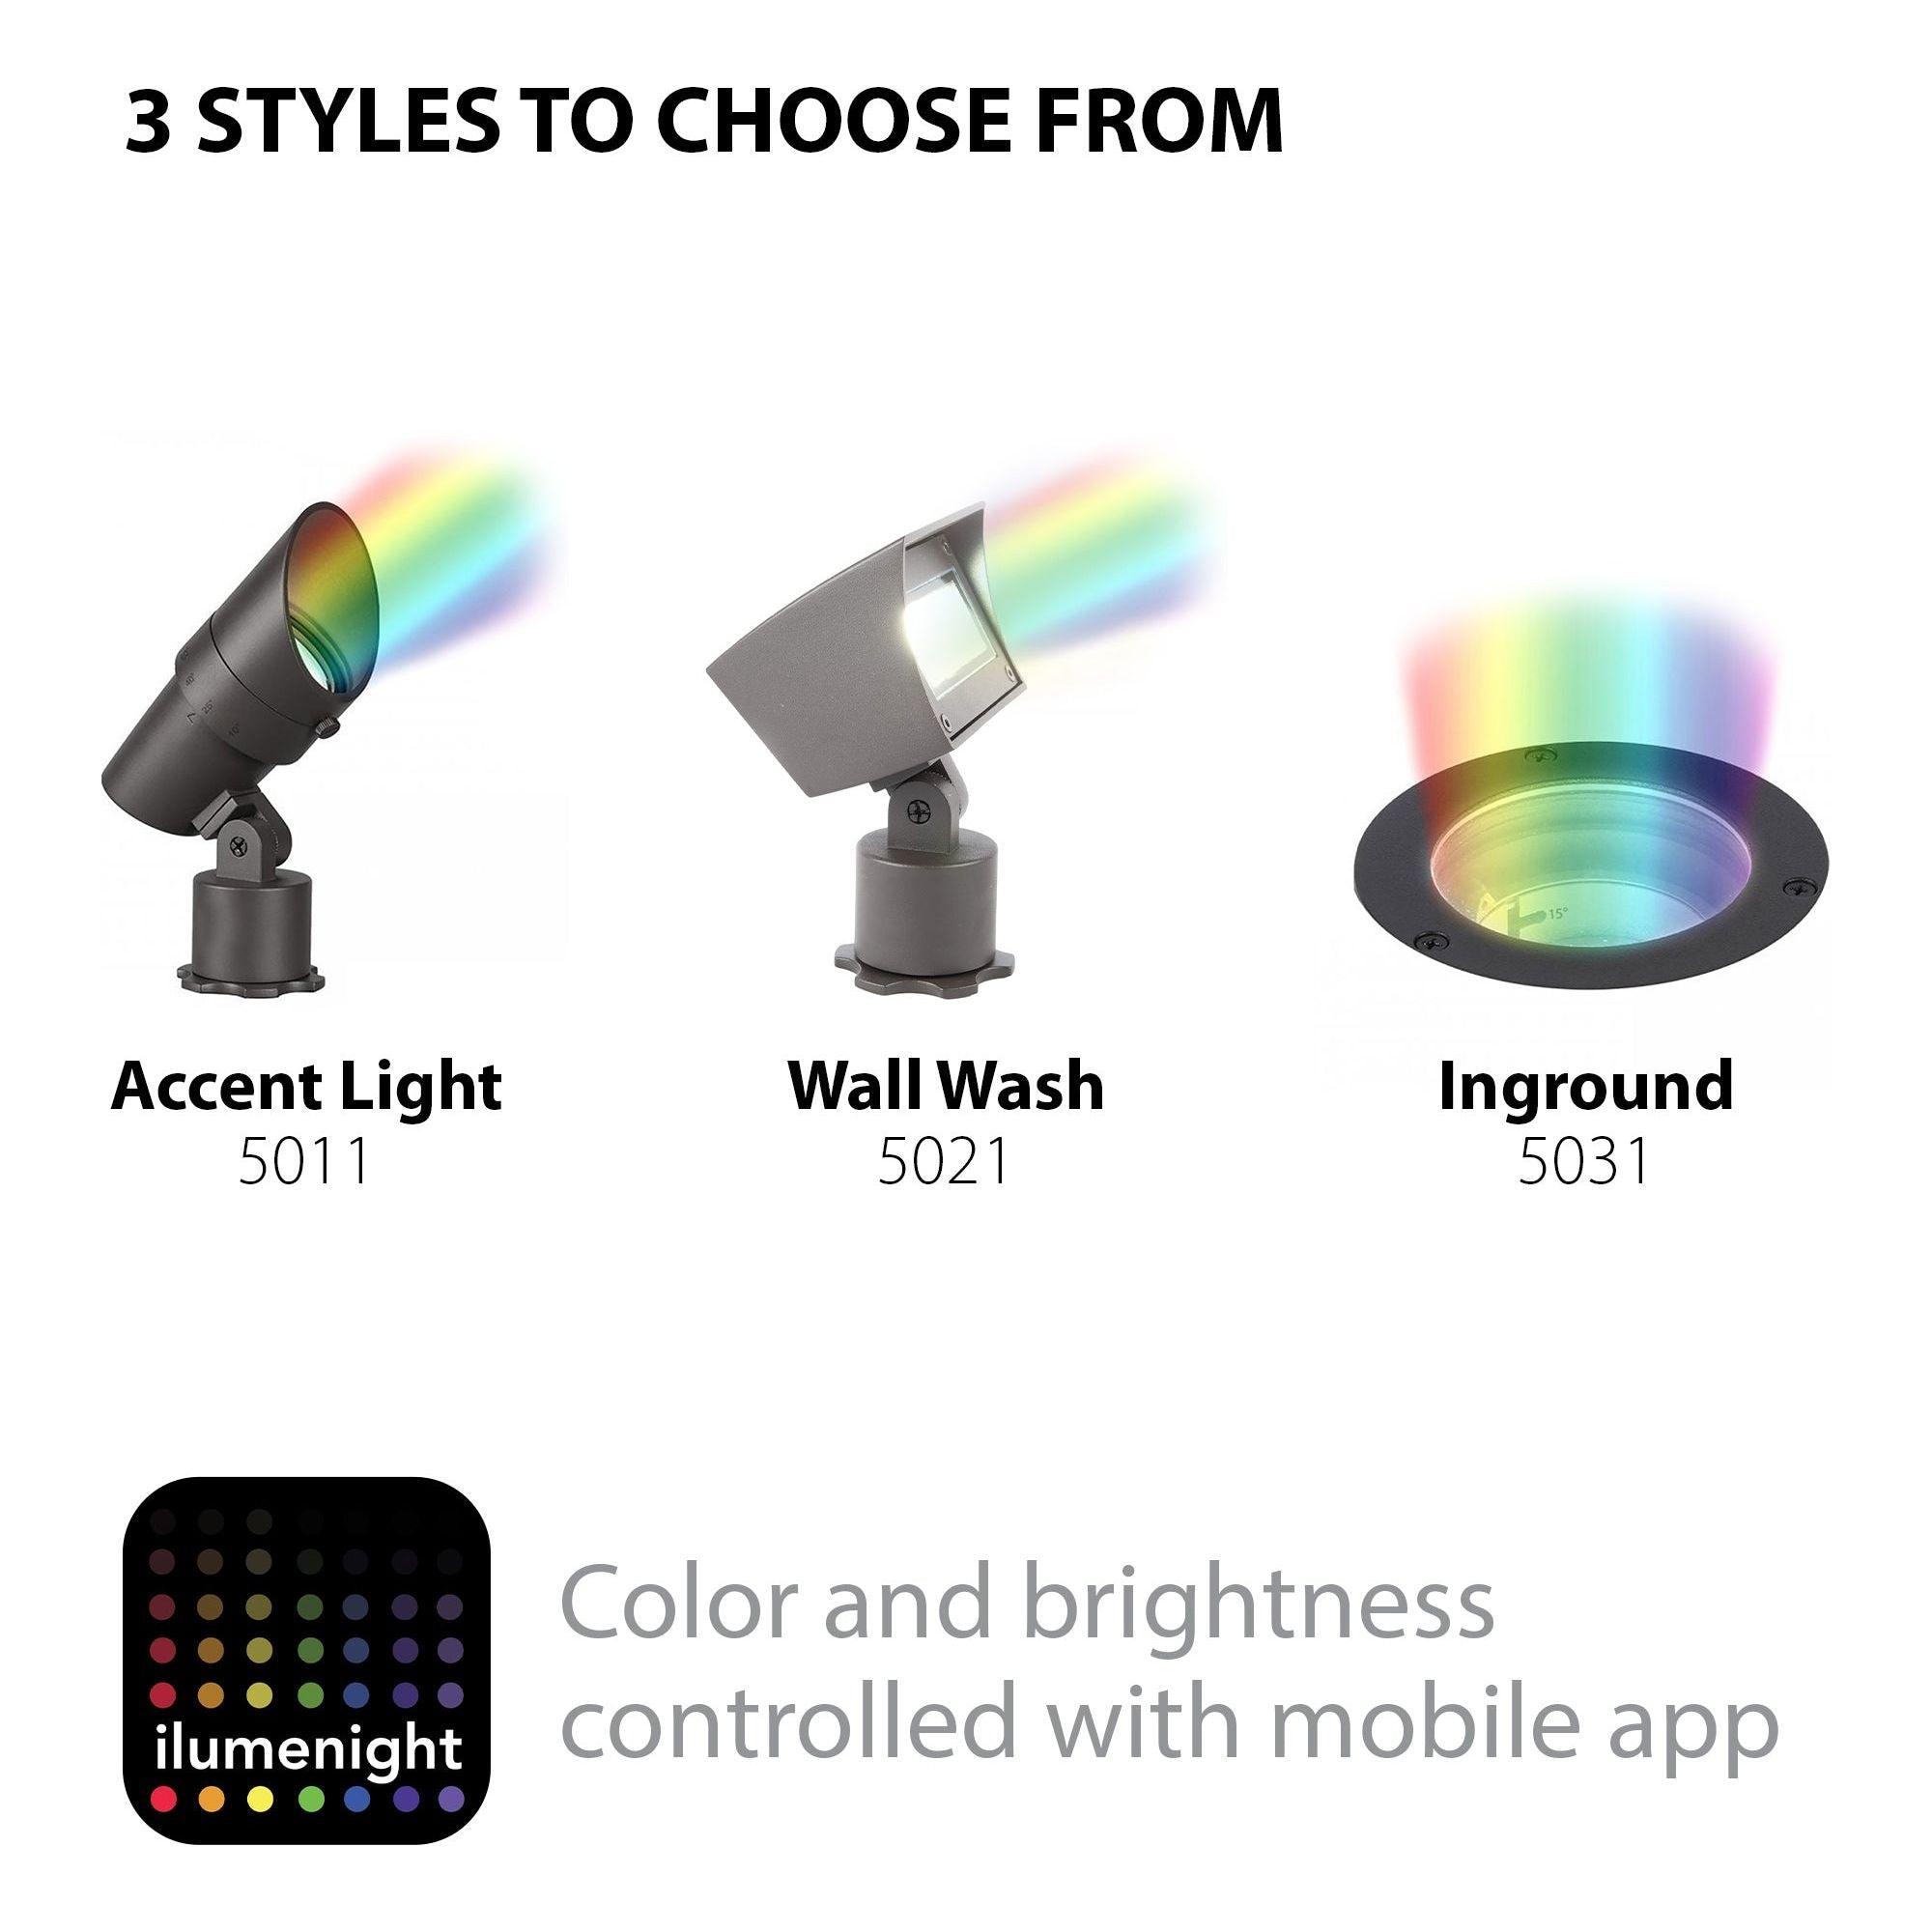 WAC Lighting - Accent Light Color Changing LED 12V with Bluetooth Smart Control App - Lights Canada